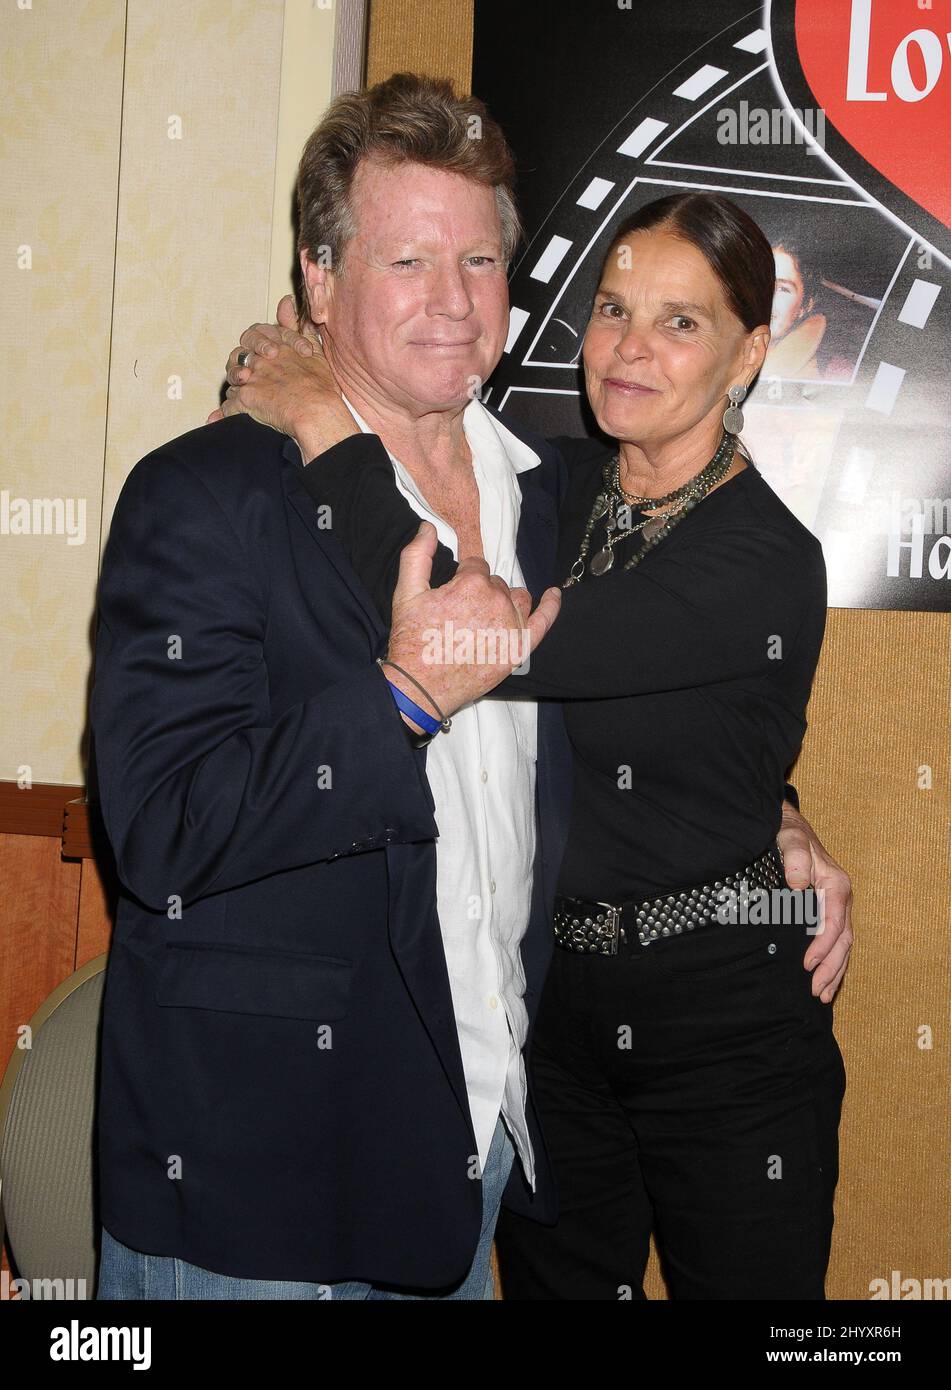 Ryan O'Neal and Ali MacGraw at the 'The Hollywood Show' Fall 2010 held at the Burbank Airport Marriott Hotel & Convention Center, Burbank, California Stock Photo